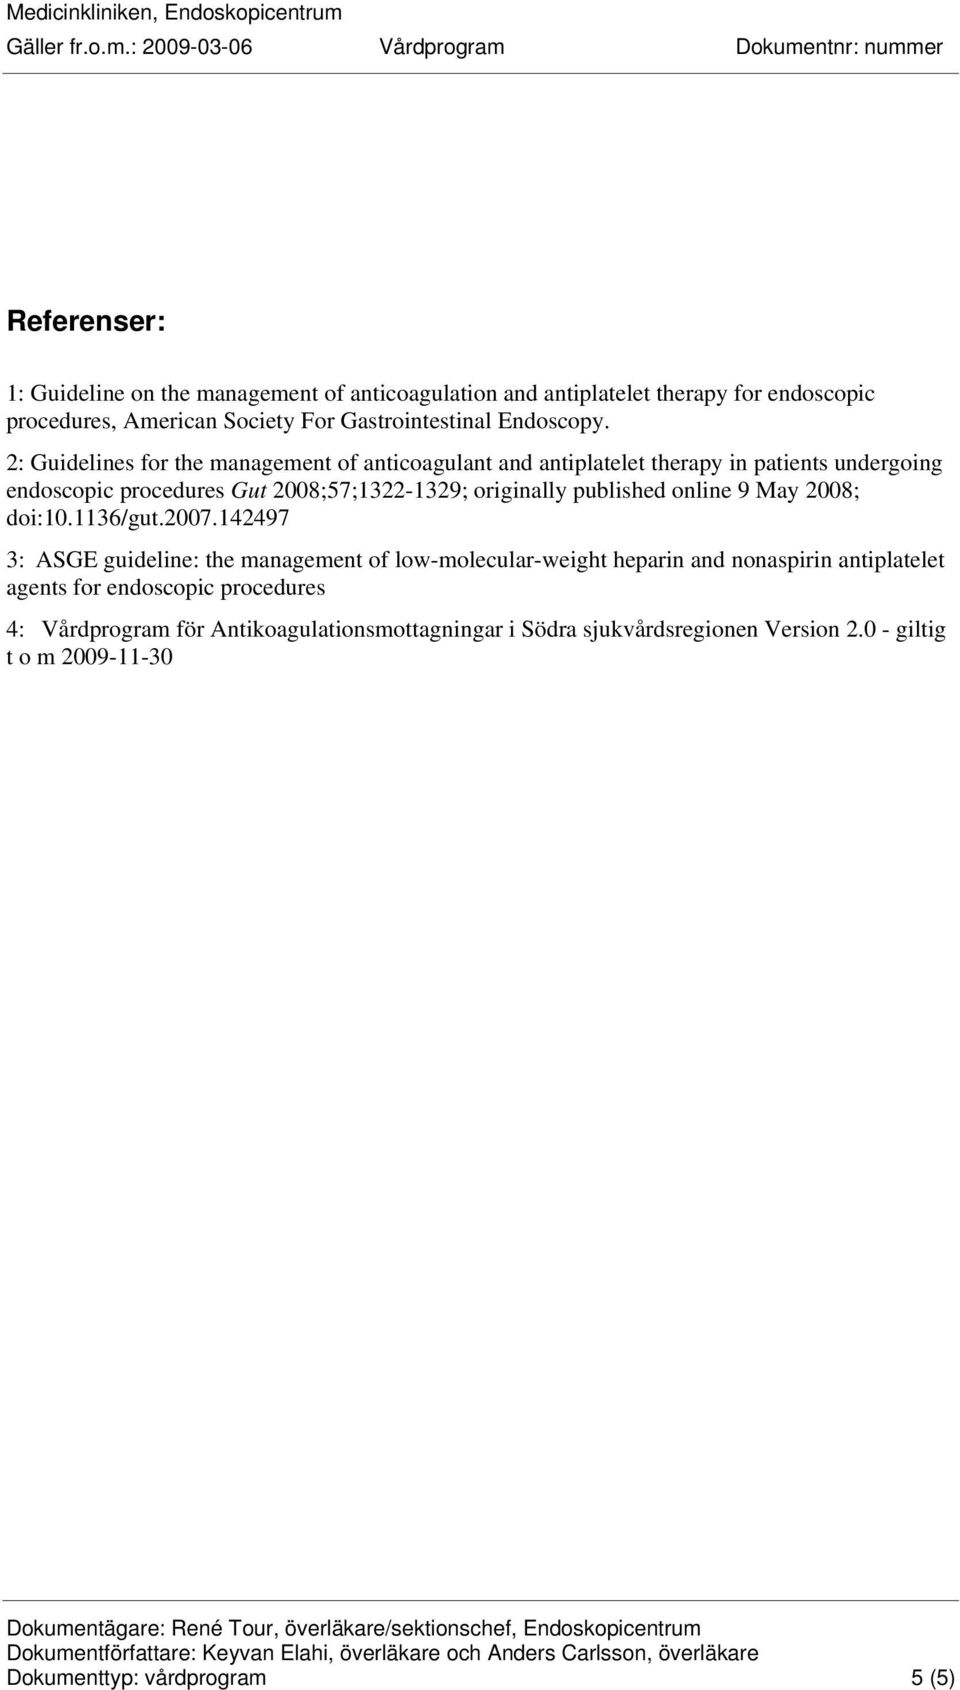 2: Guidelines for the management of anticoagulant and antiplatelet therapy in patients undergoing endoscopic procedures Gut 2008;57;1322-1329; originally